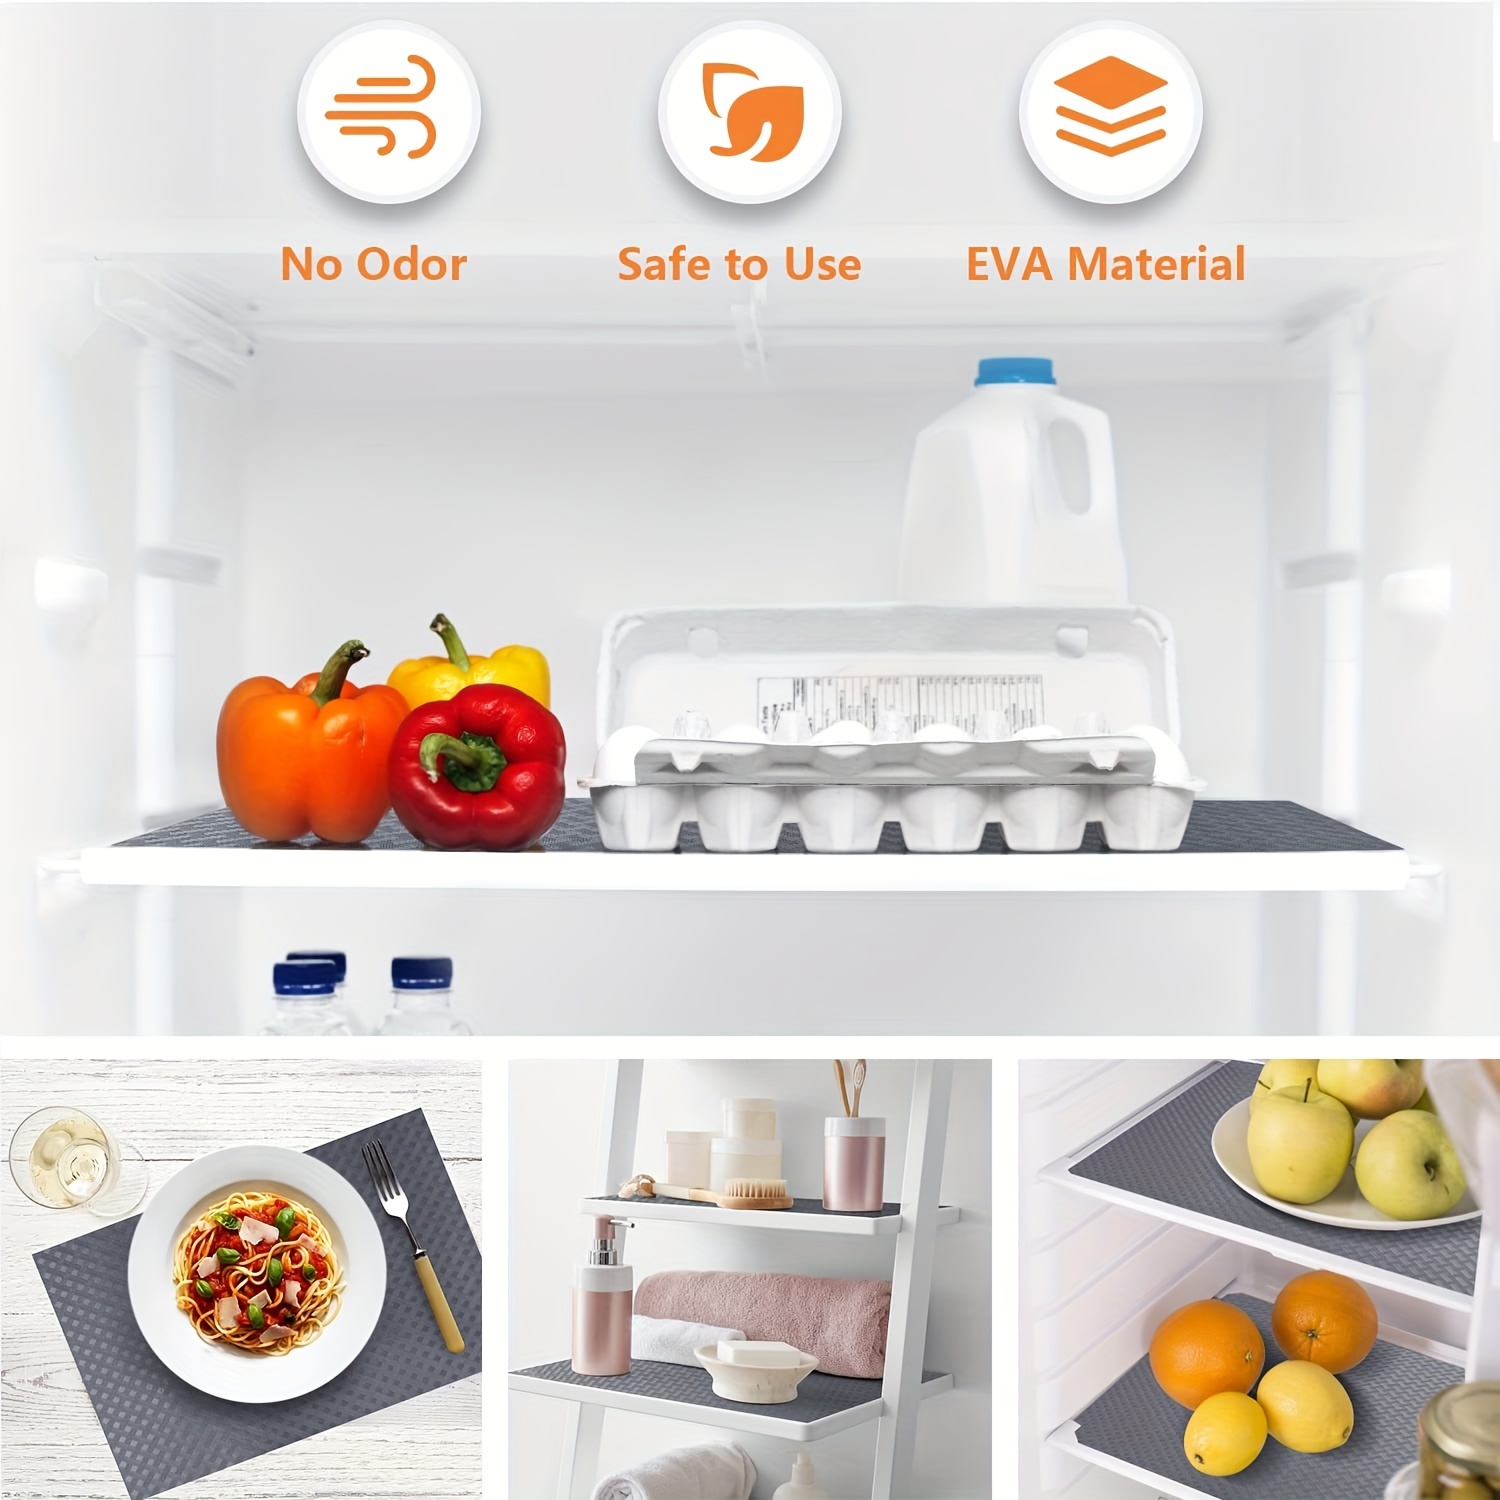 Jtween Shelf Liner Kitchen Drawer Mats, Non Adhesive Eva Material Refrigerator Liners with Waterproof Durable Fridge Table Place Mats for Cupboard